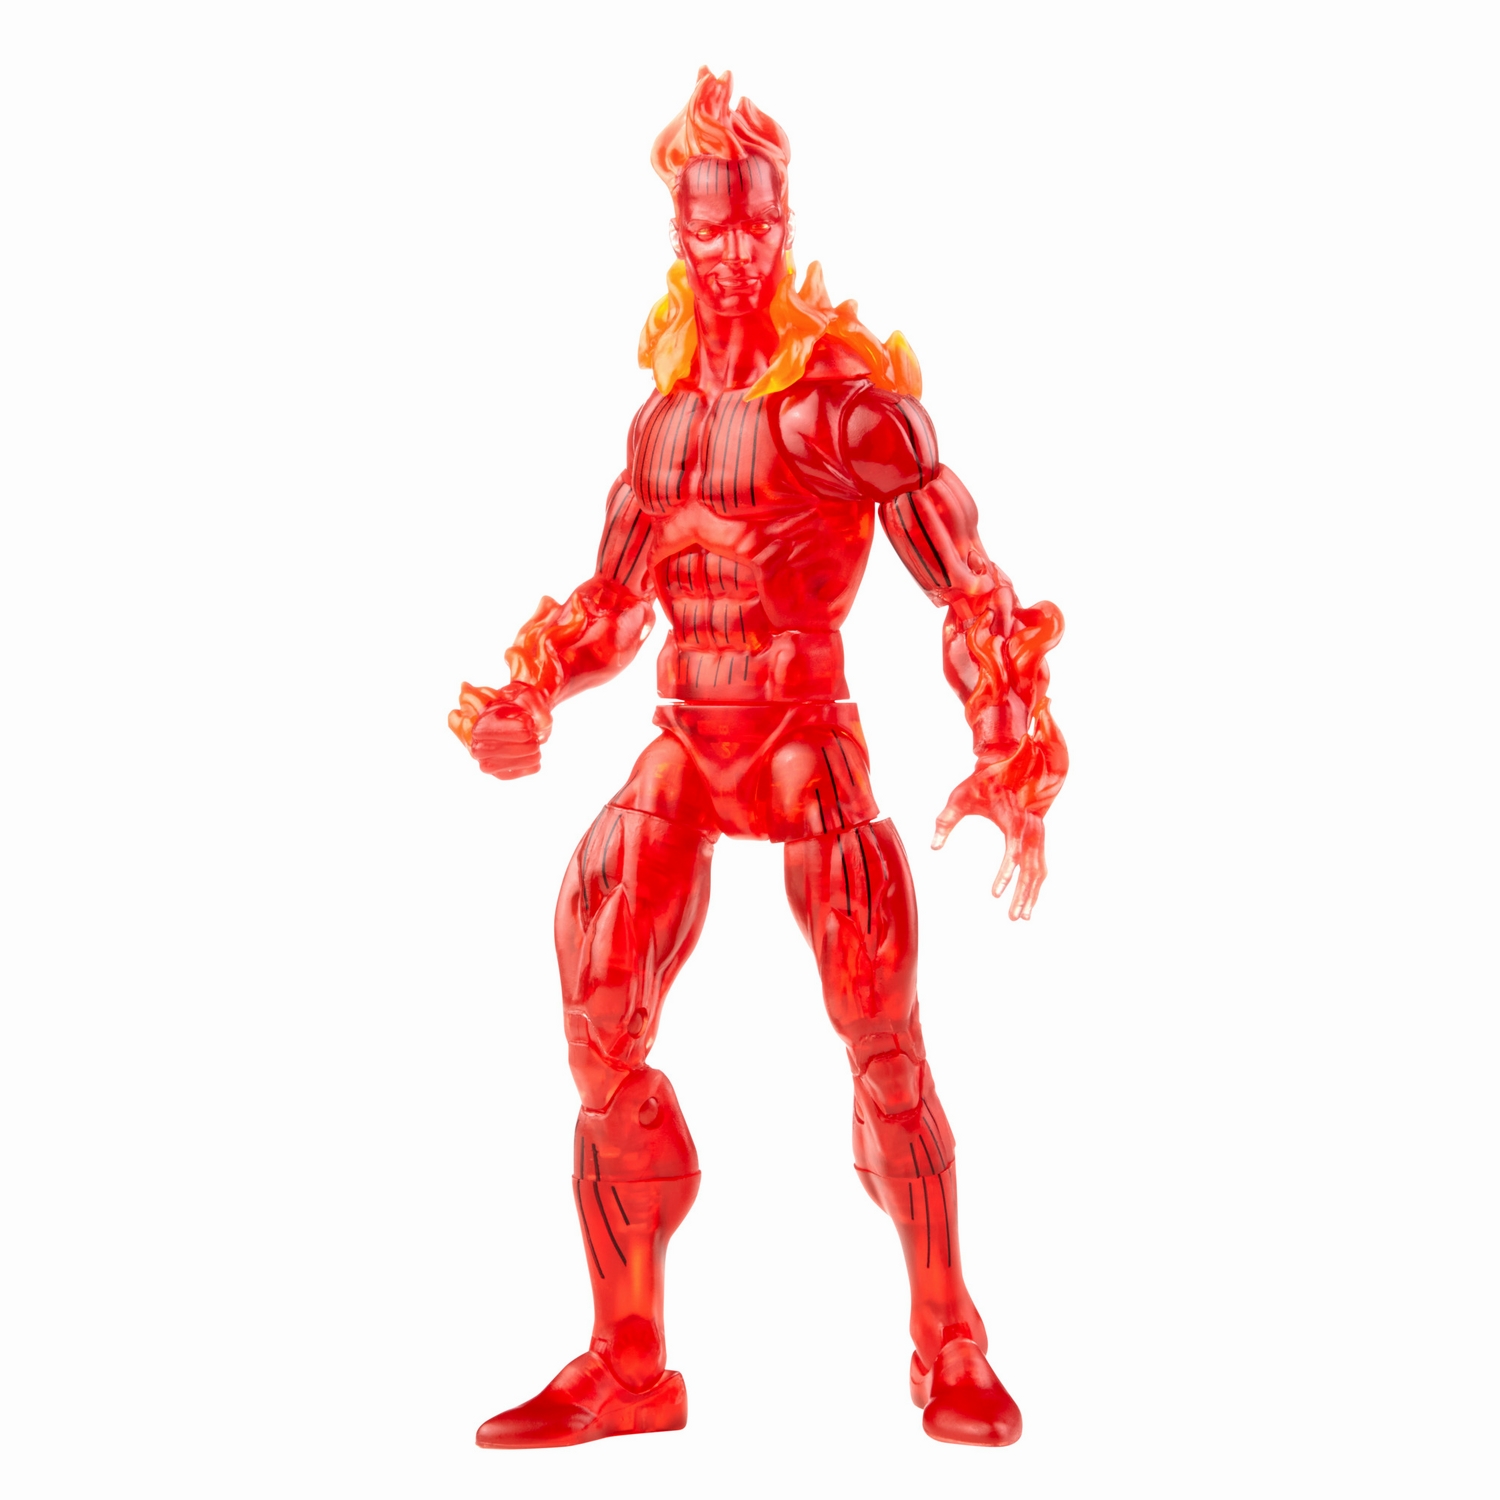 MARVEL LEGENDS SERIES 6-INCH RETRO FANTASTIC FOUR THE HUMAN TORCH Figure_oop 5.jpg